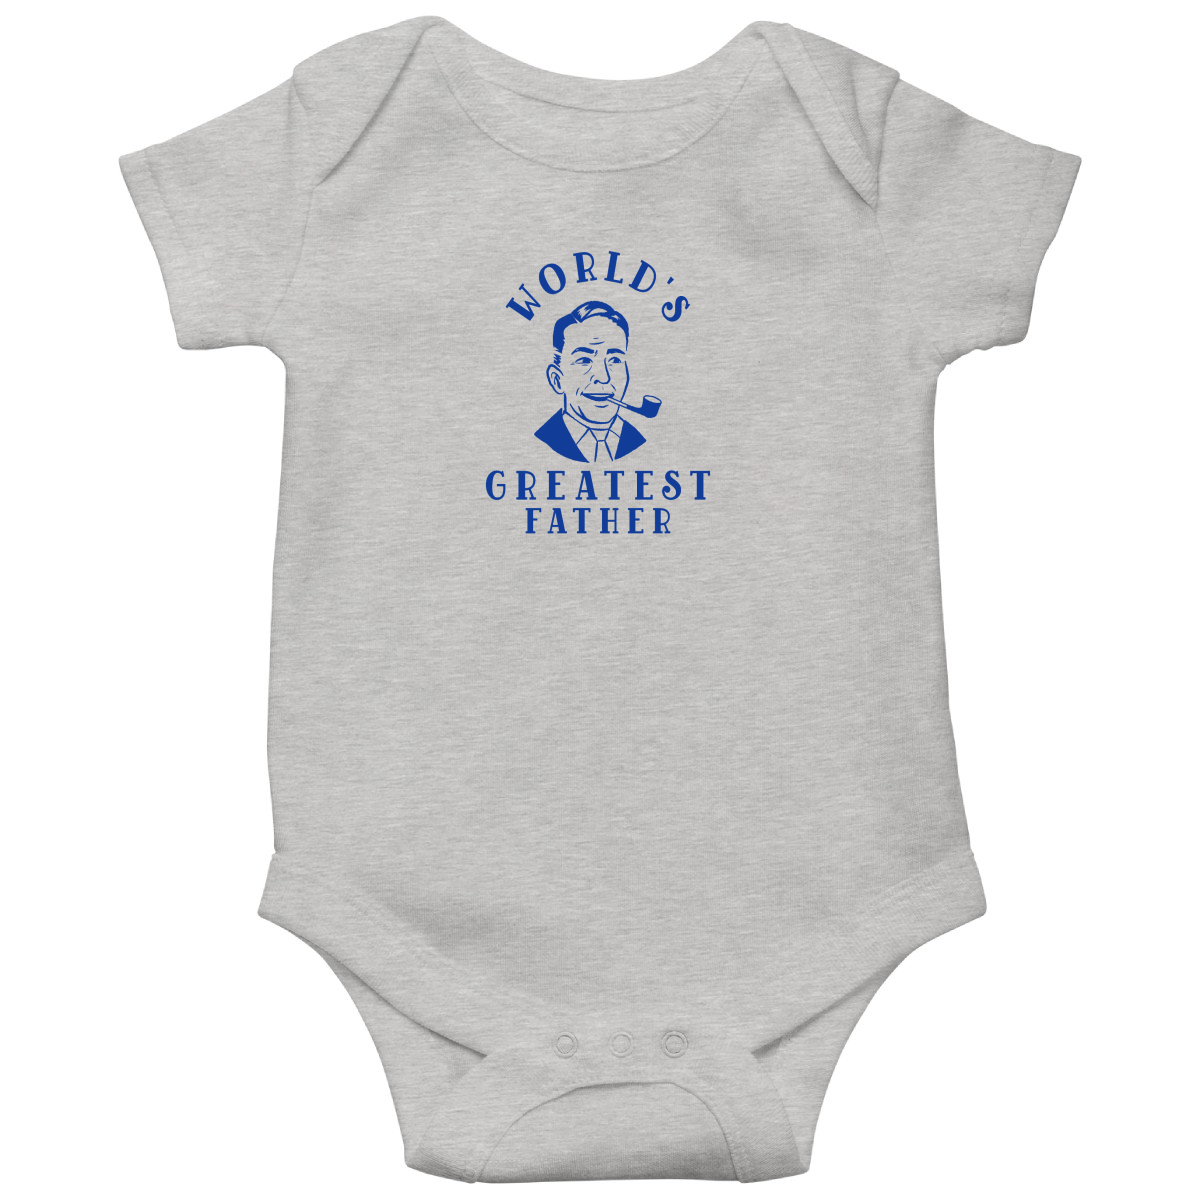 World's Greatest Father Baby Bodysuits | Gray